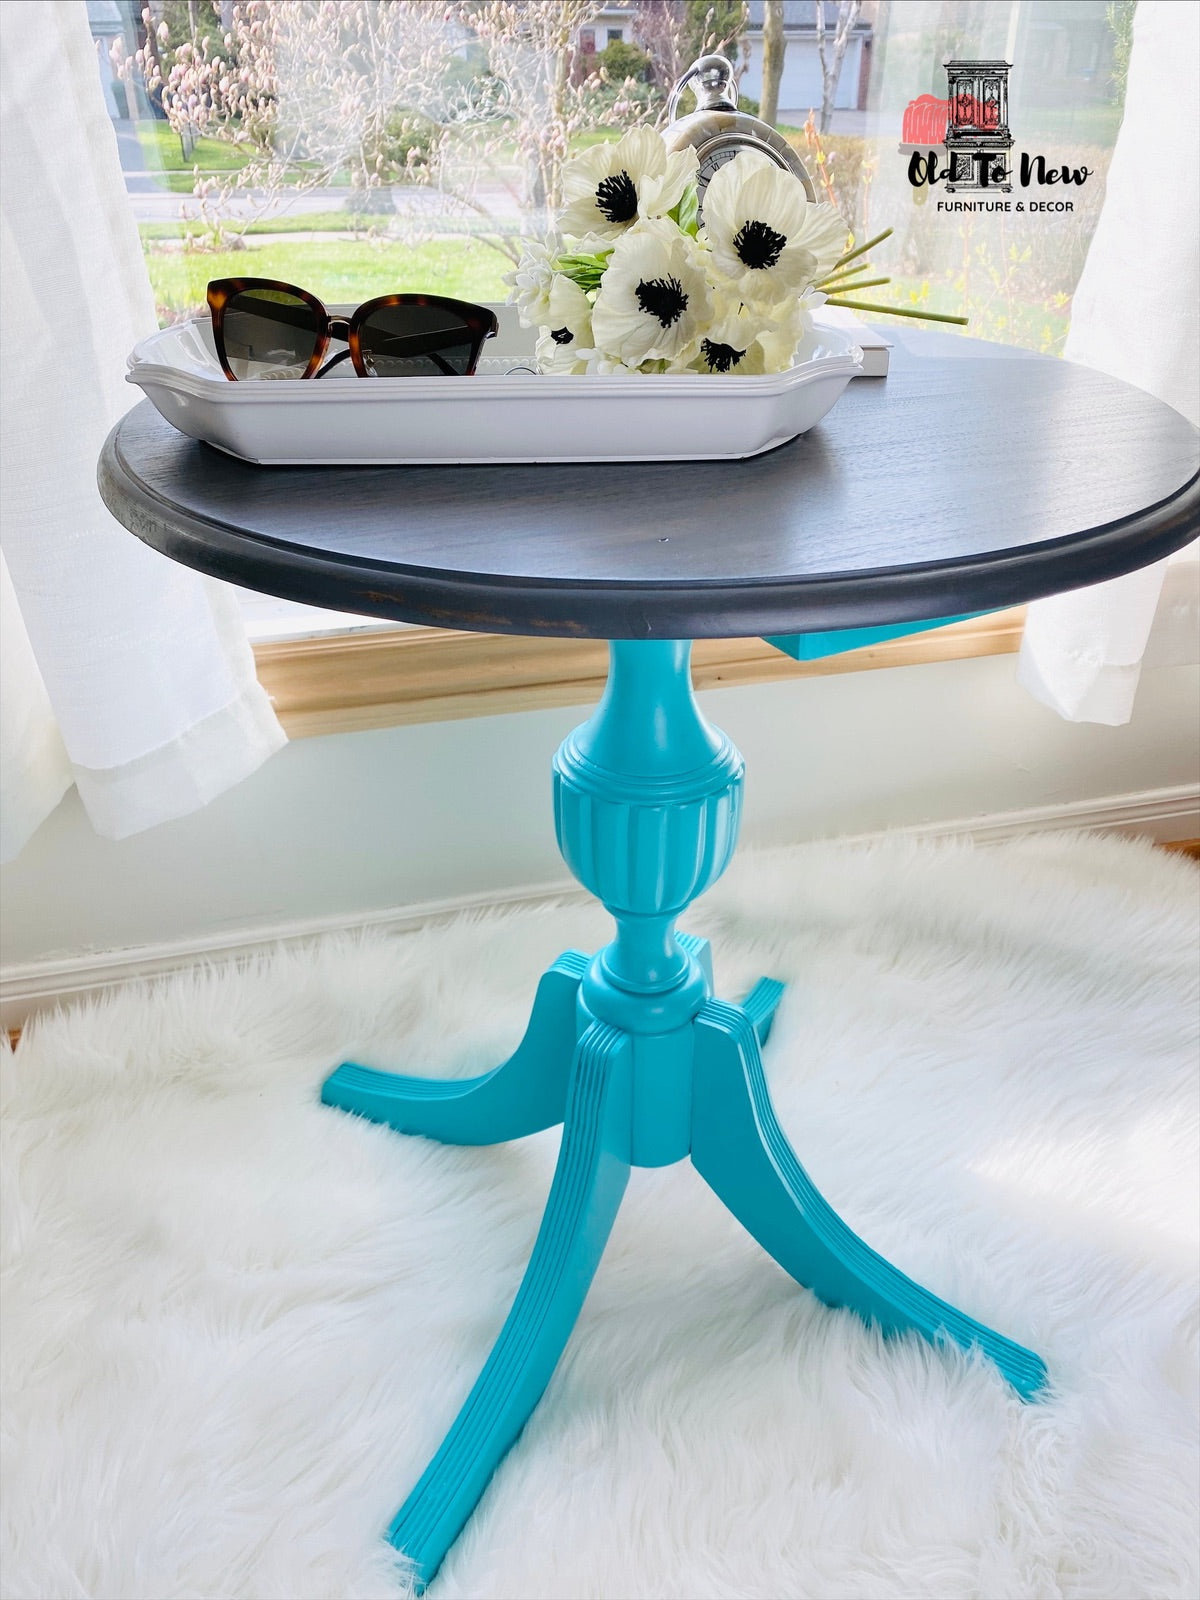 Classy Aqua Blue Accent Table Refinished With Annie Sloan Chalk Paint and Stained Modern Farmhouse Grey.